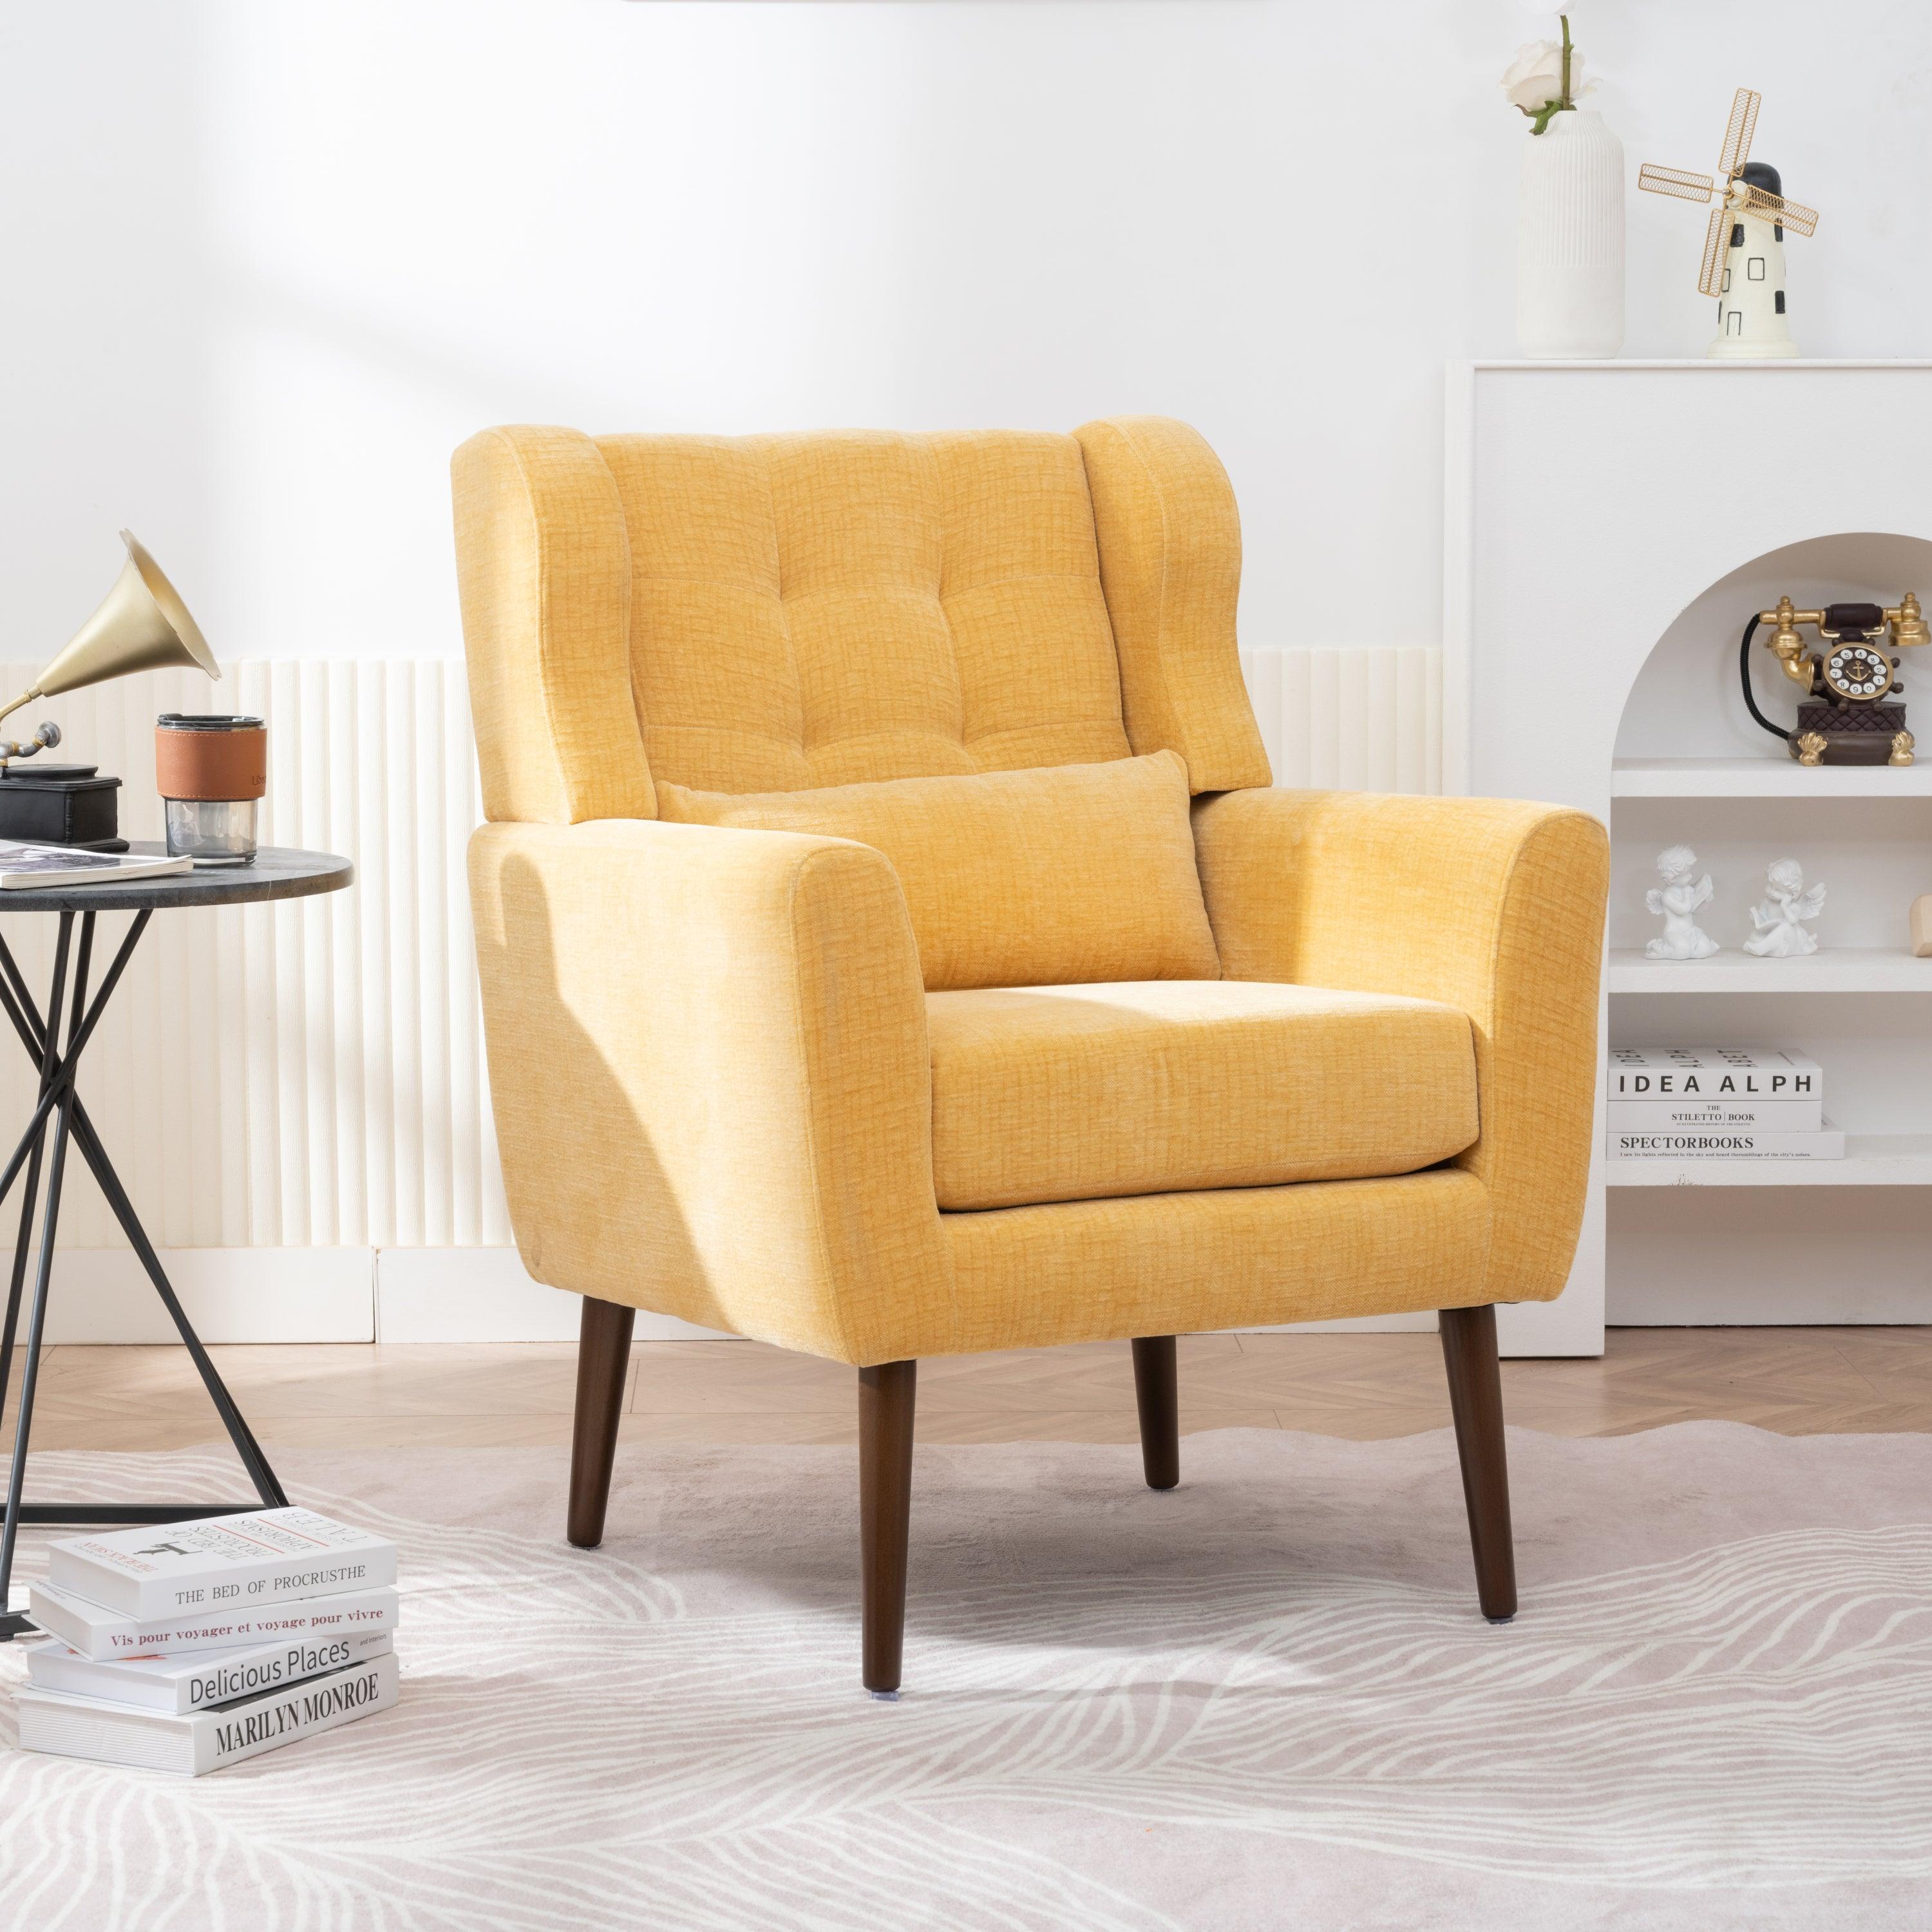 🆓🚛 Modern Accent Chair Upholstered Foam Filled Living Room Chairs Comfy Reading Chair Mid Century Modern Chair With Chenille Fabric Lounge Arm Chairs Armchair for Living Room Bedroom (Yellow)